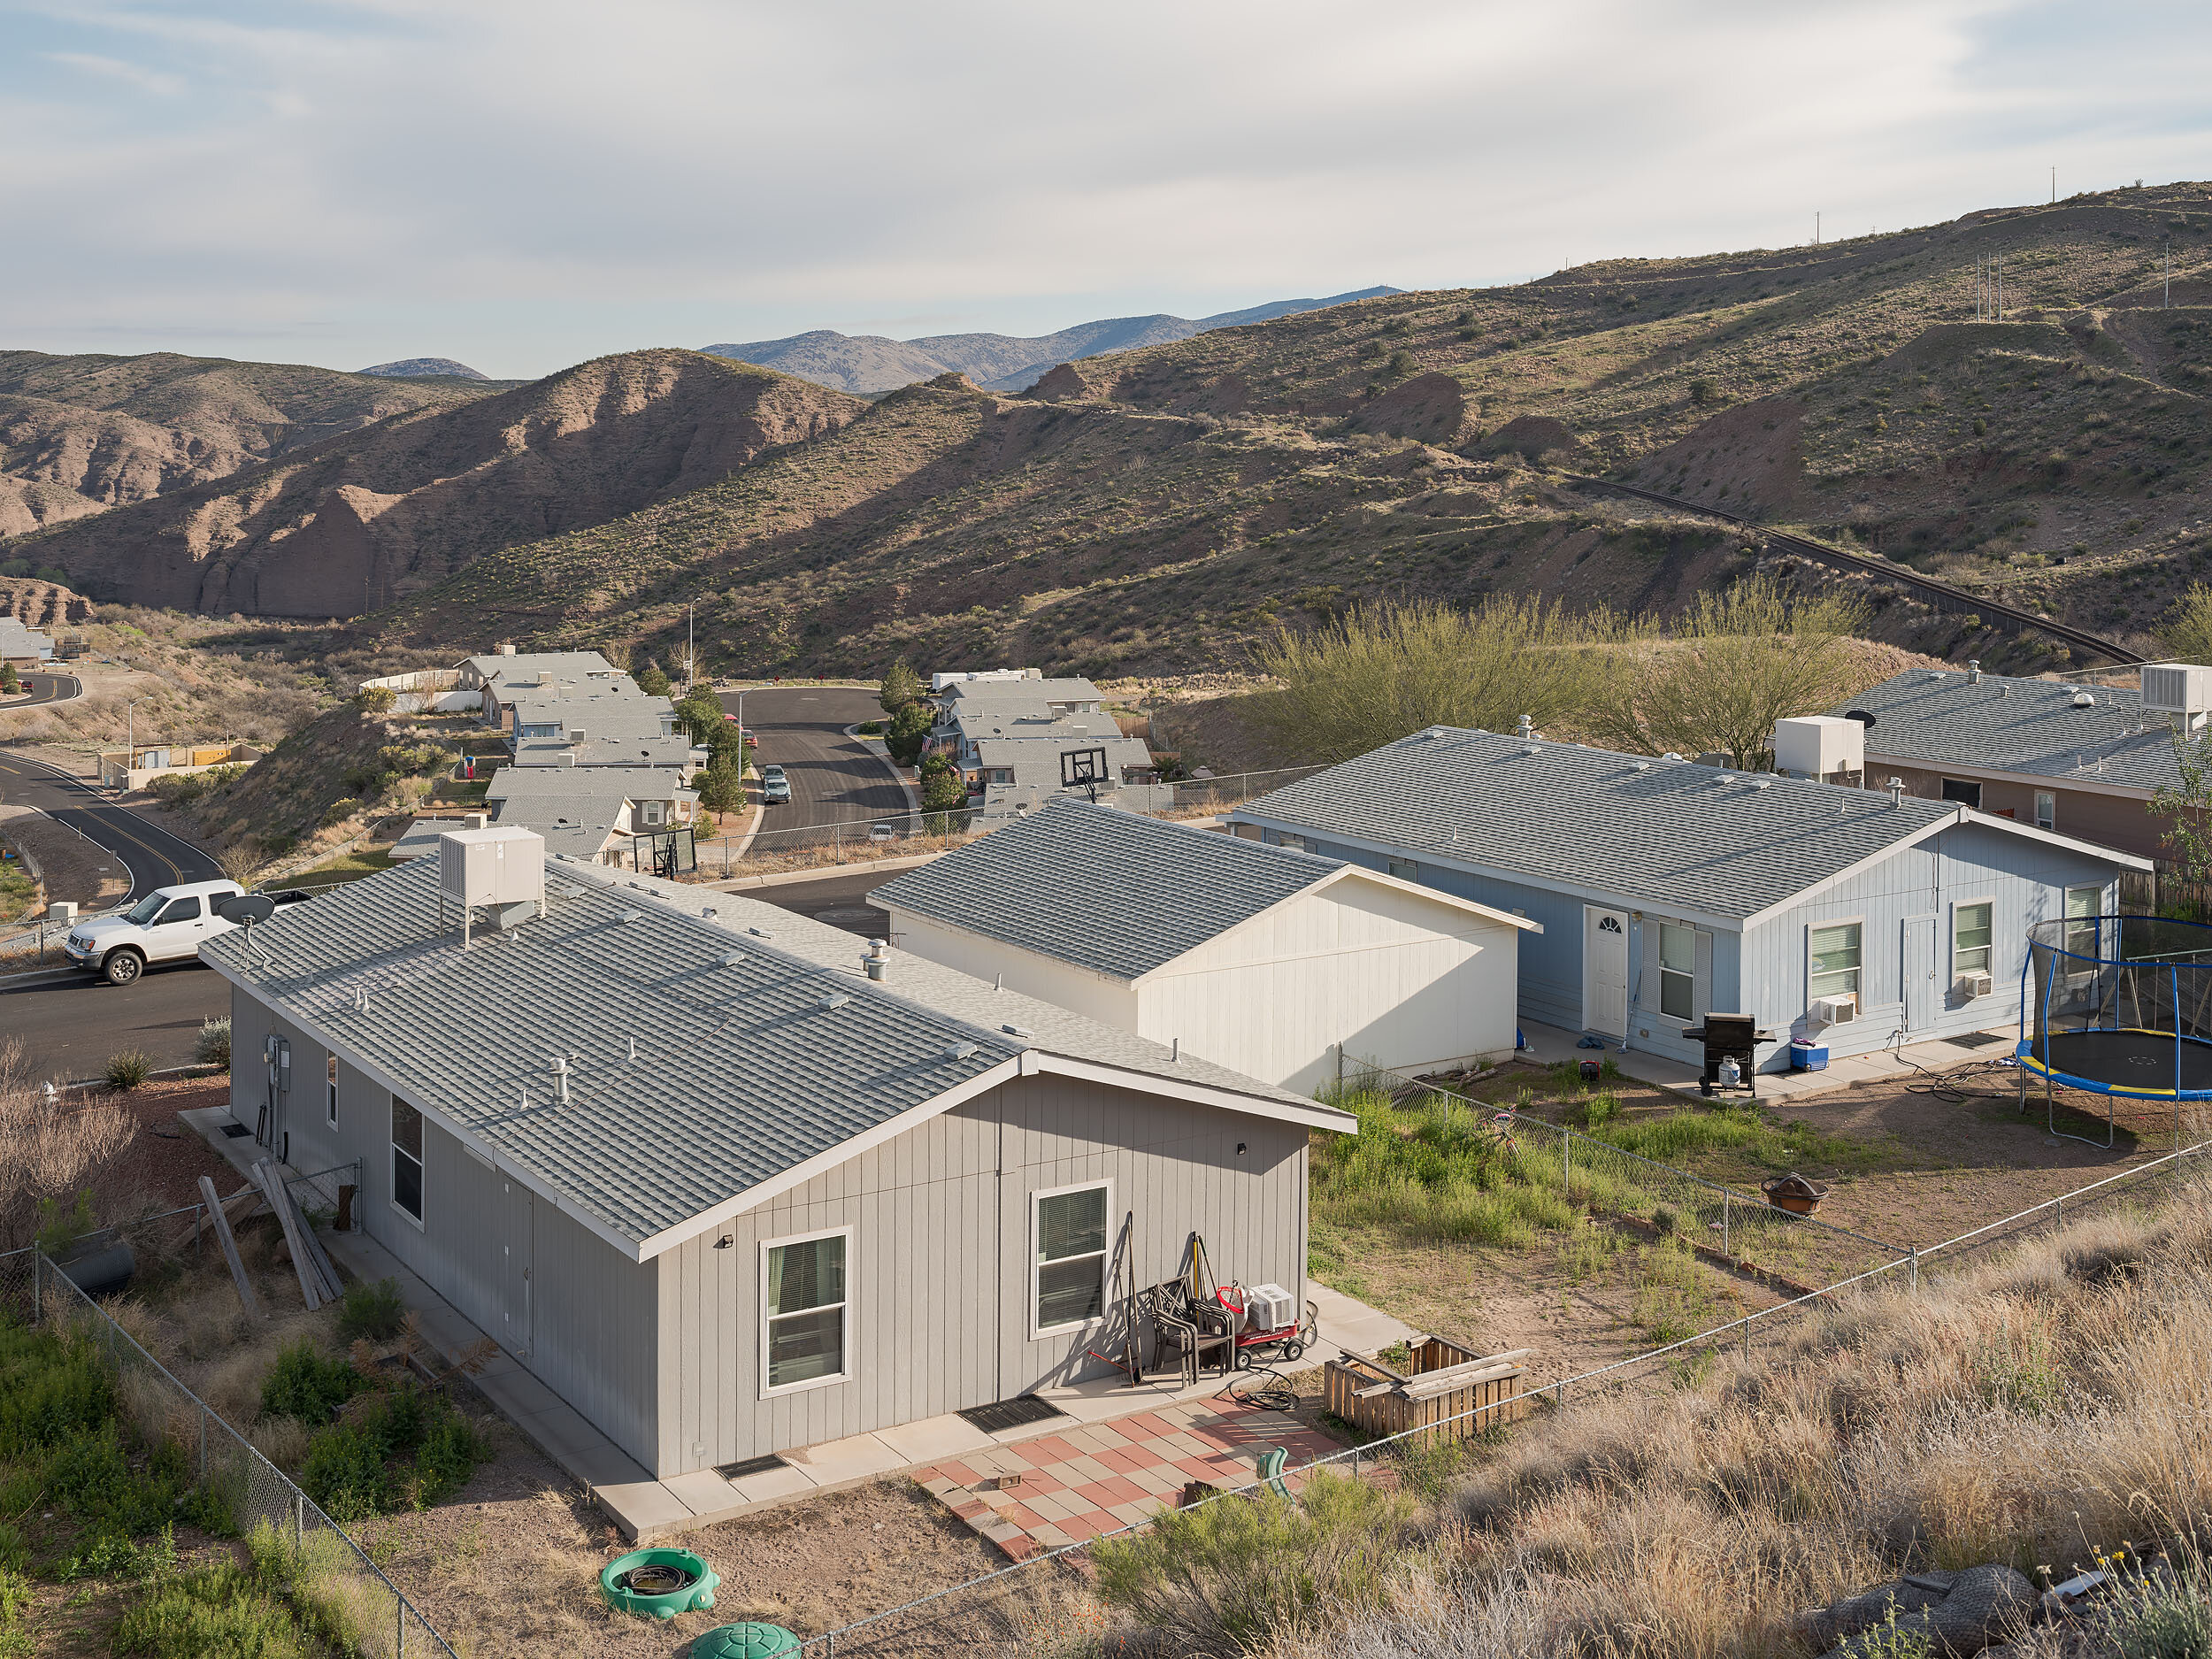  "Copper Verde" Freeport-McMoran Morenci Homes, built with modular construction. A resident suggested this type of fabrication suited a likely scenario where the neighborhood would be moved elsewhere, to allow mining in this location. 